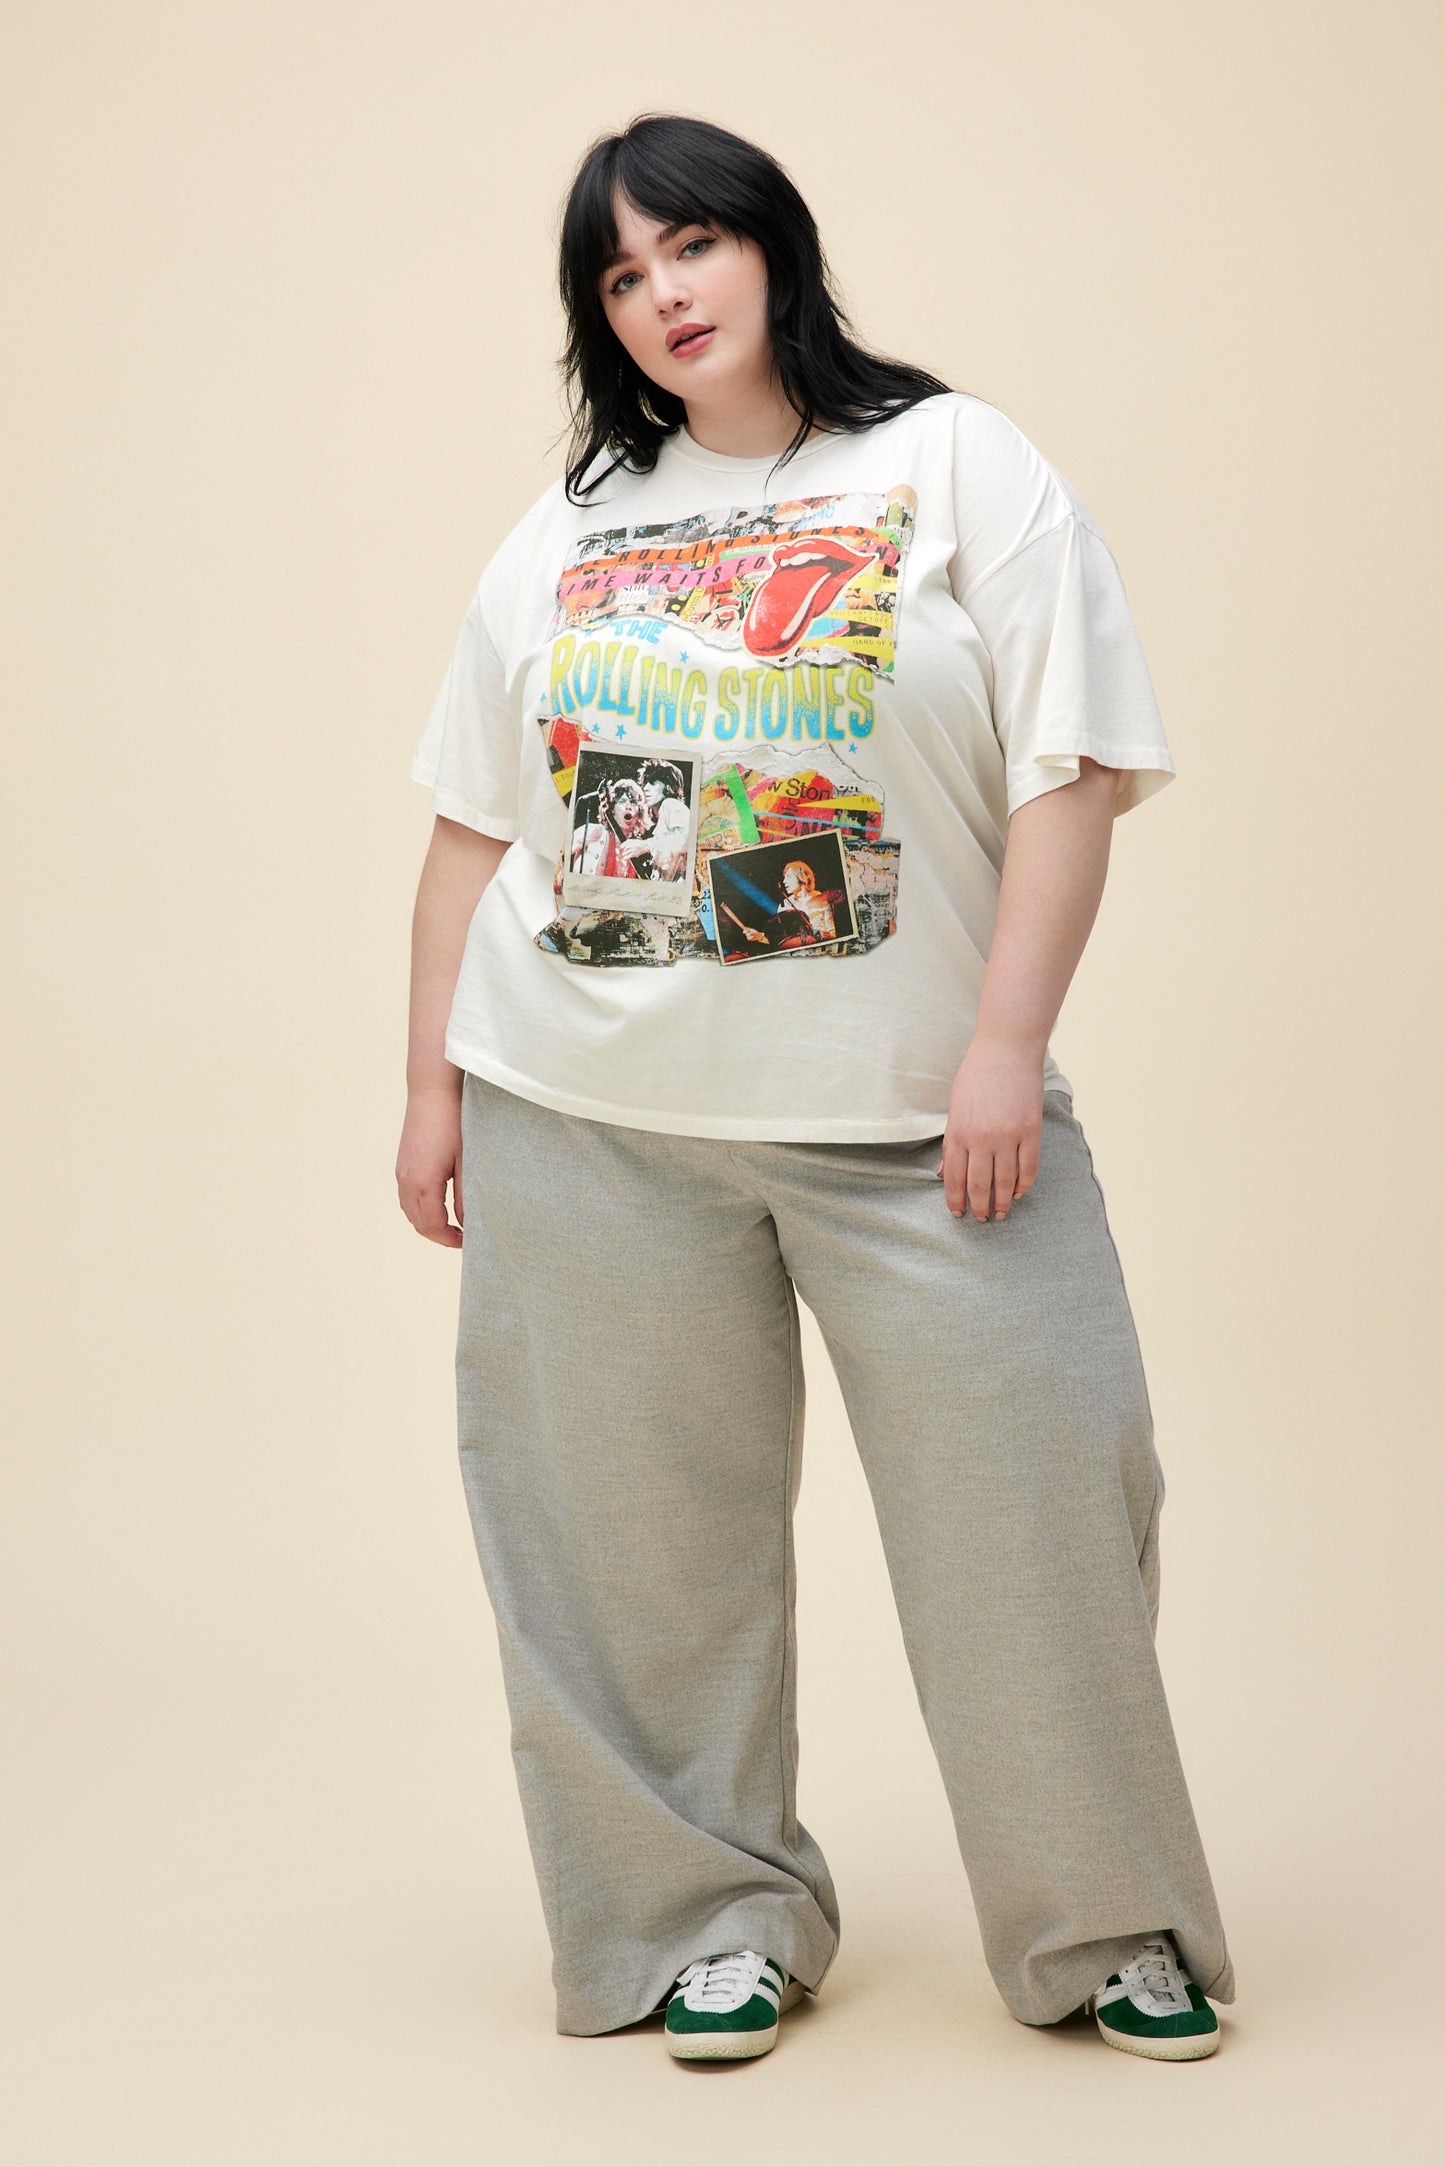 A model featuring a white tee ES stamped with 'The Rolling Stones' with collage pictures of the band performing at concerts.